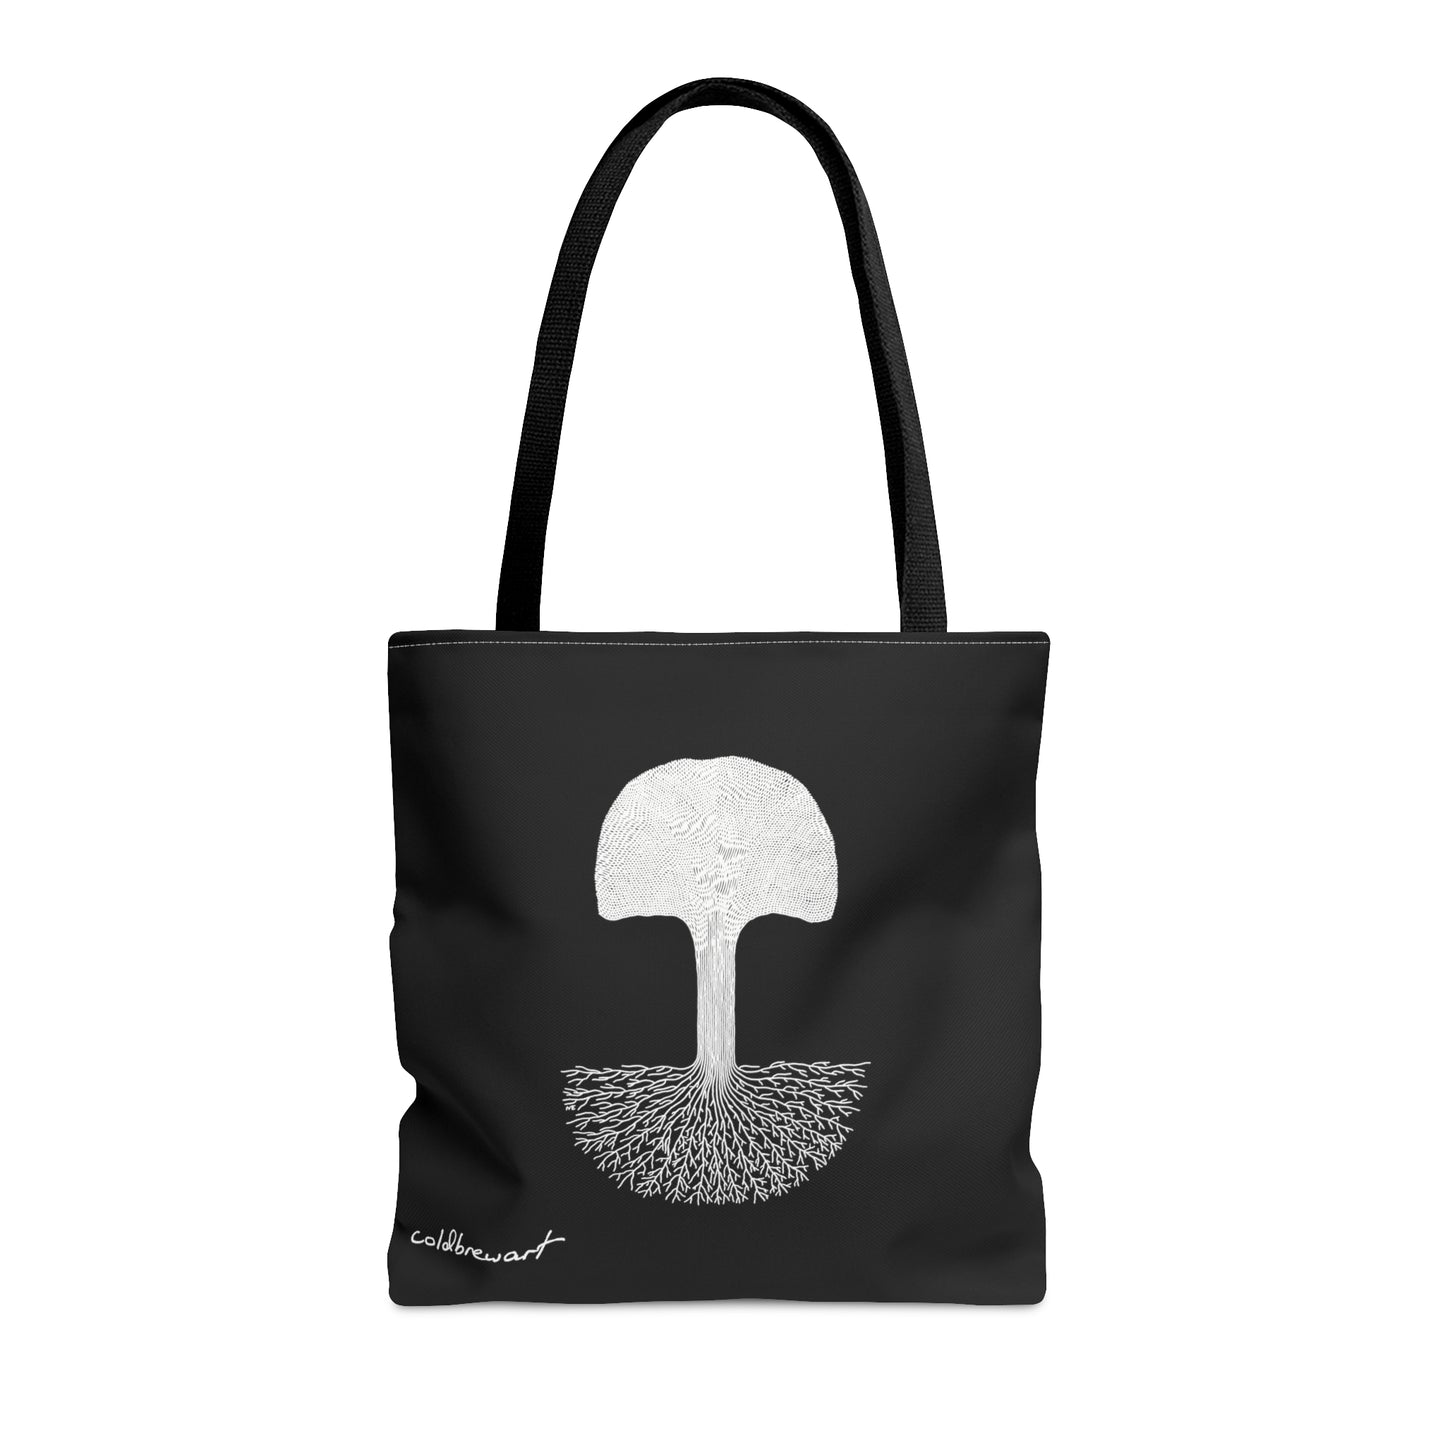 Barren Forest(White) Tote Bag